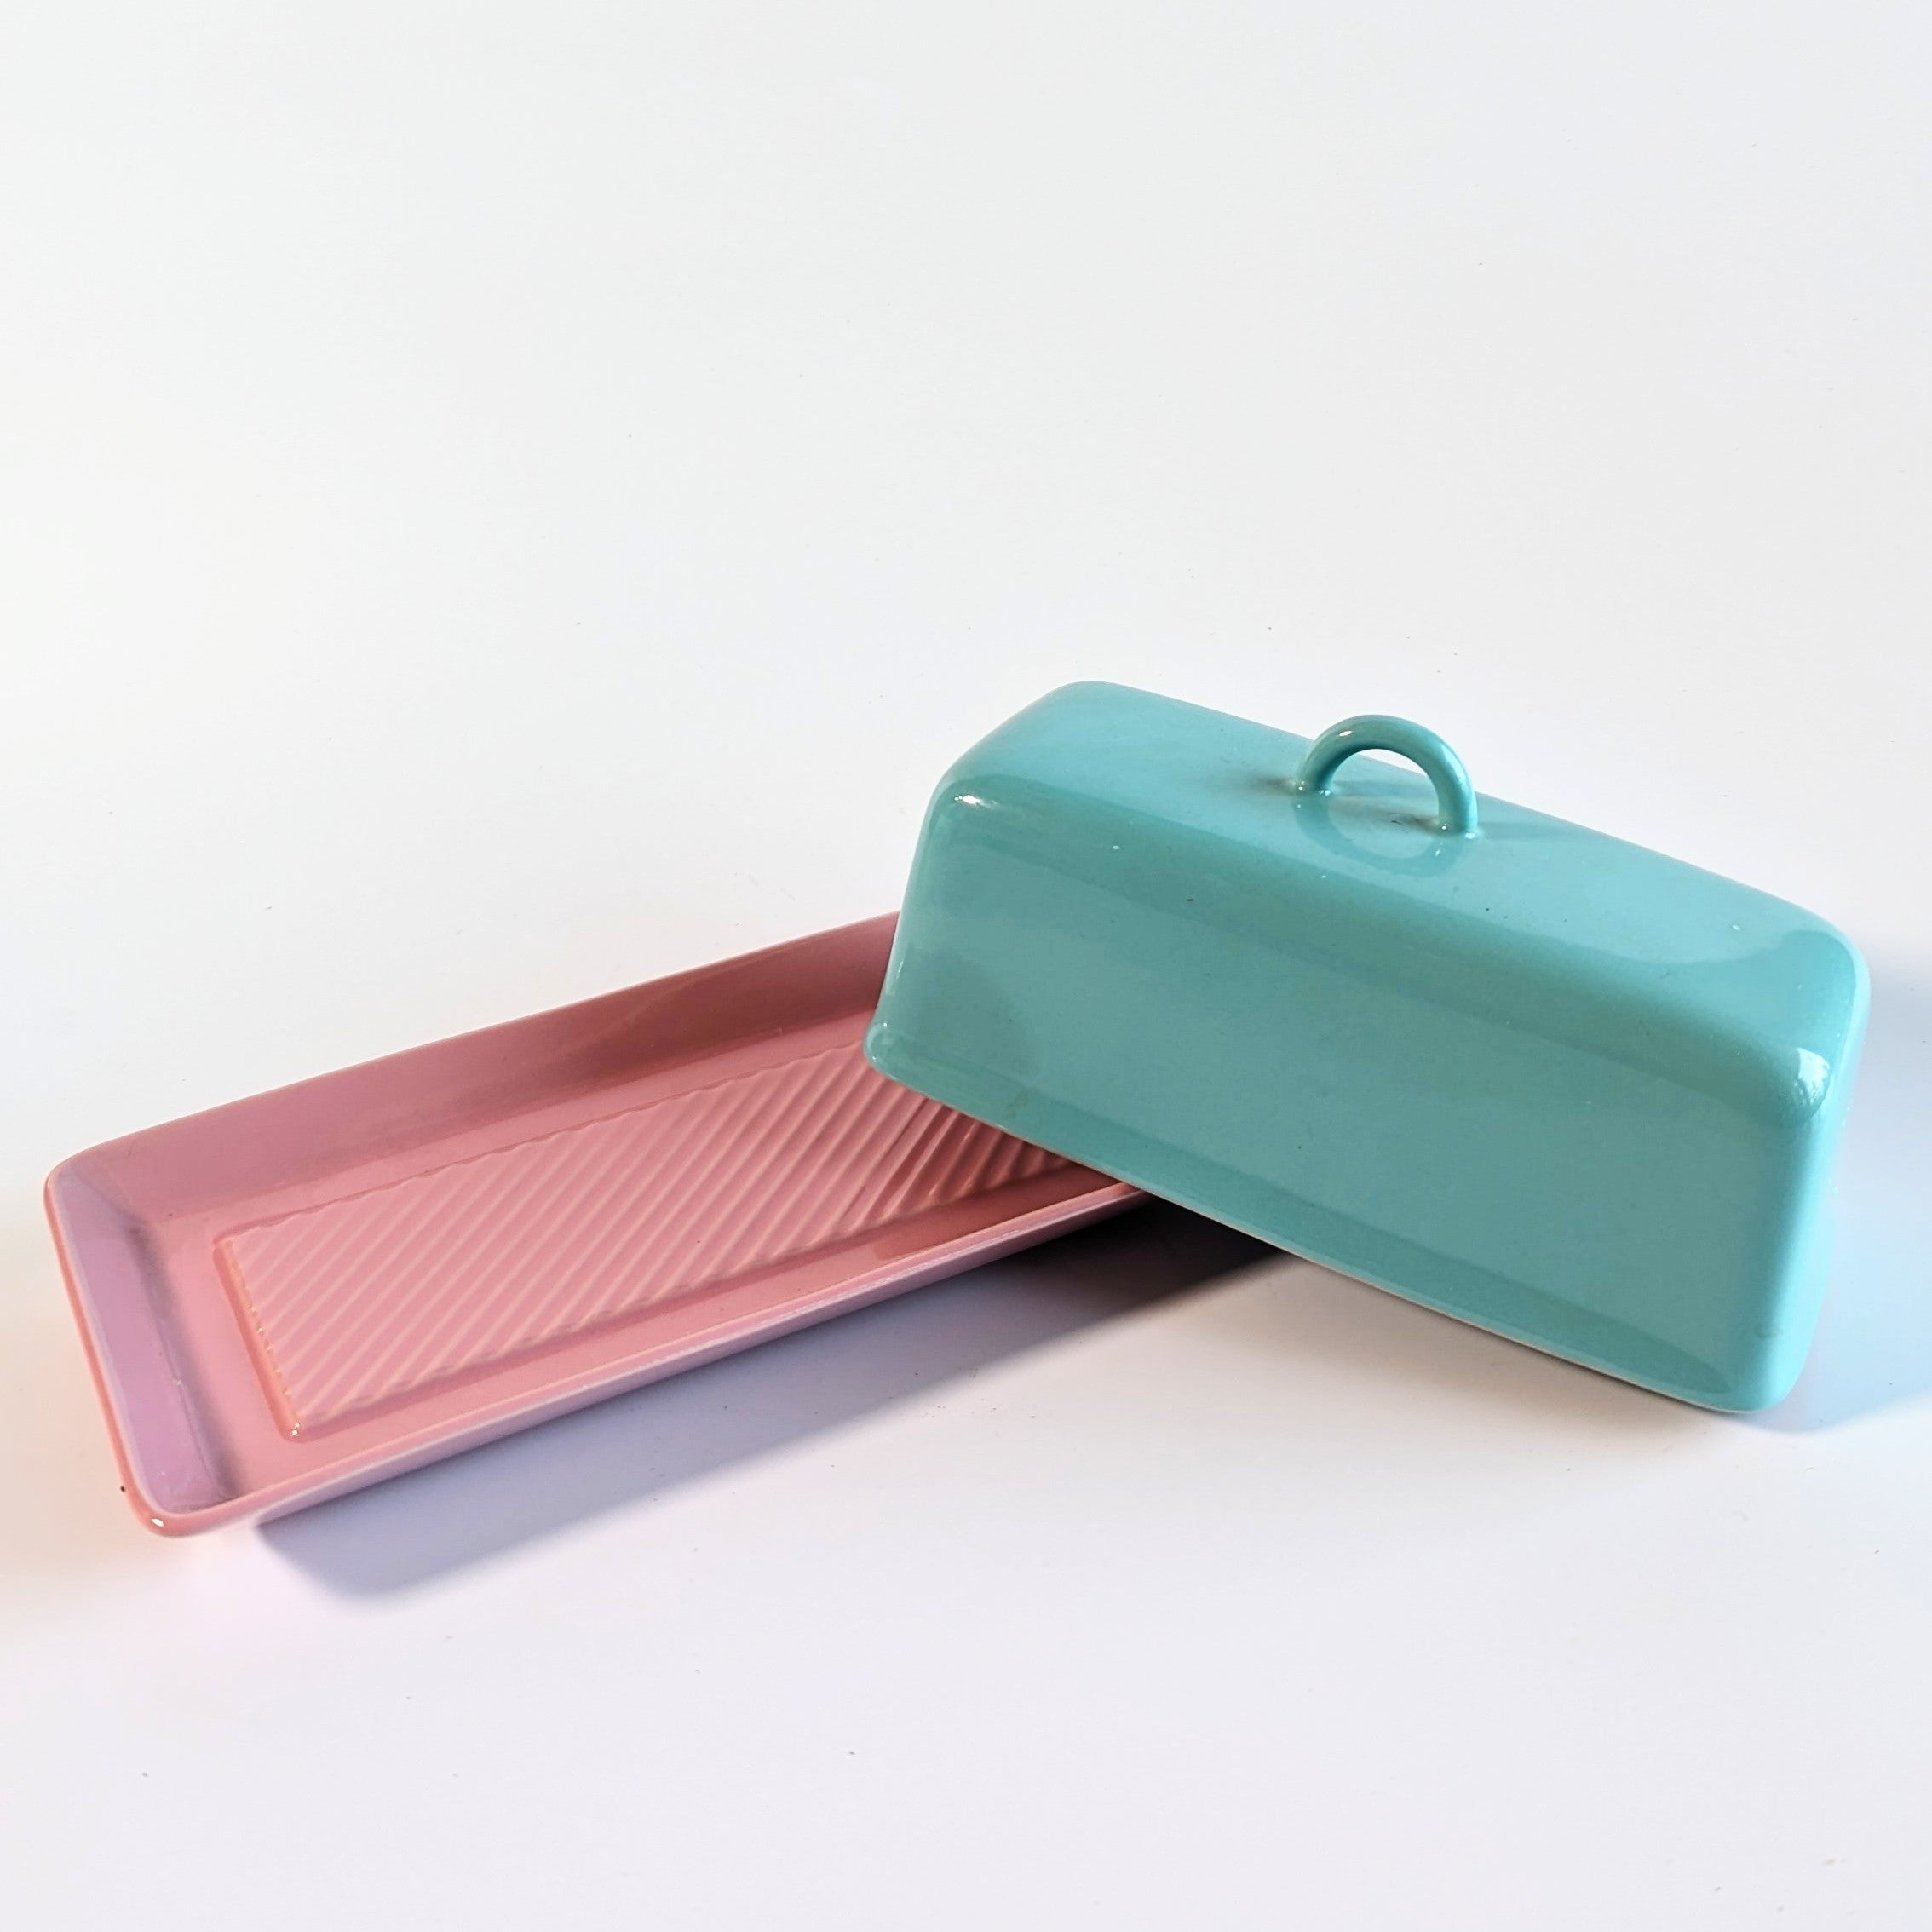 Vintage 1970s Colorways Covered Butter Dish by Lindt-Stymeist